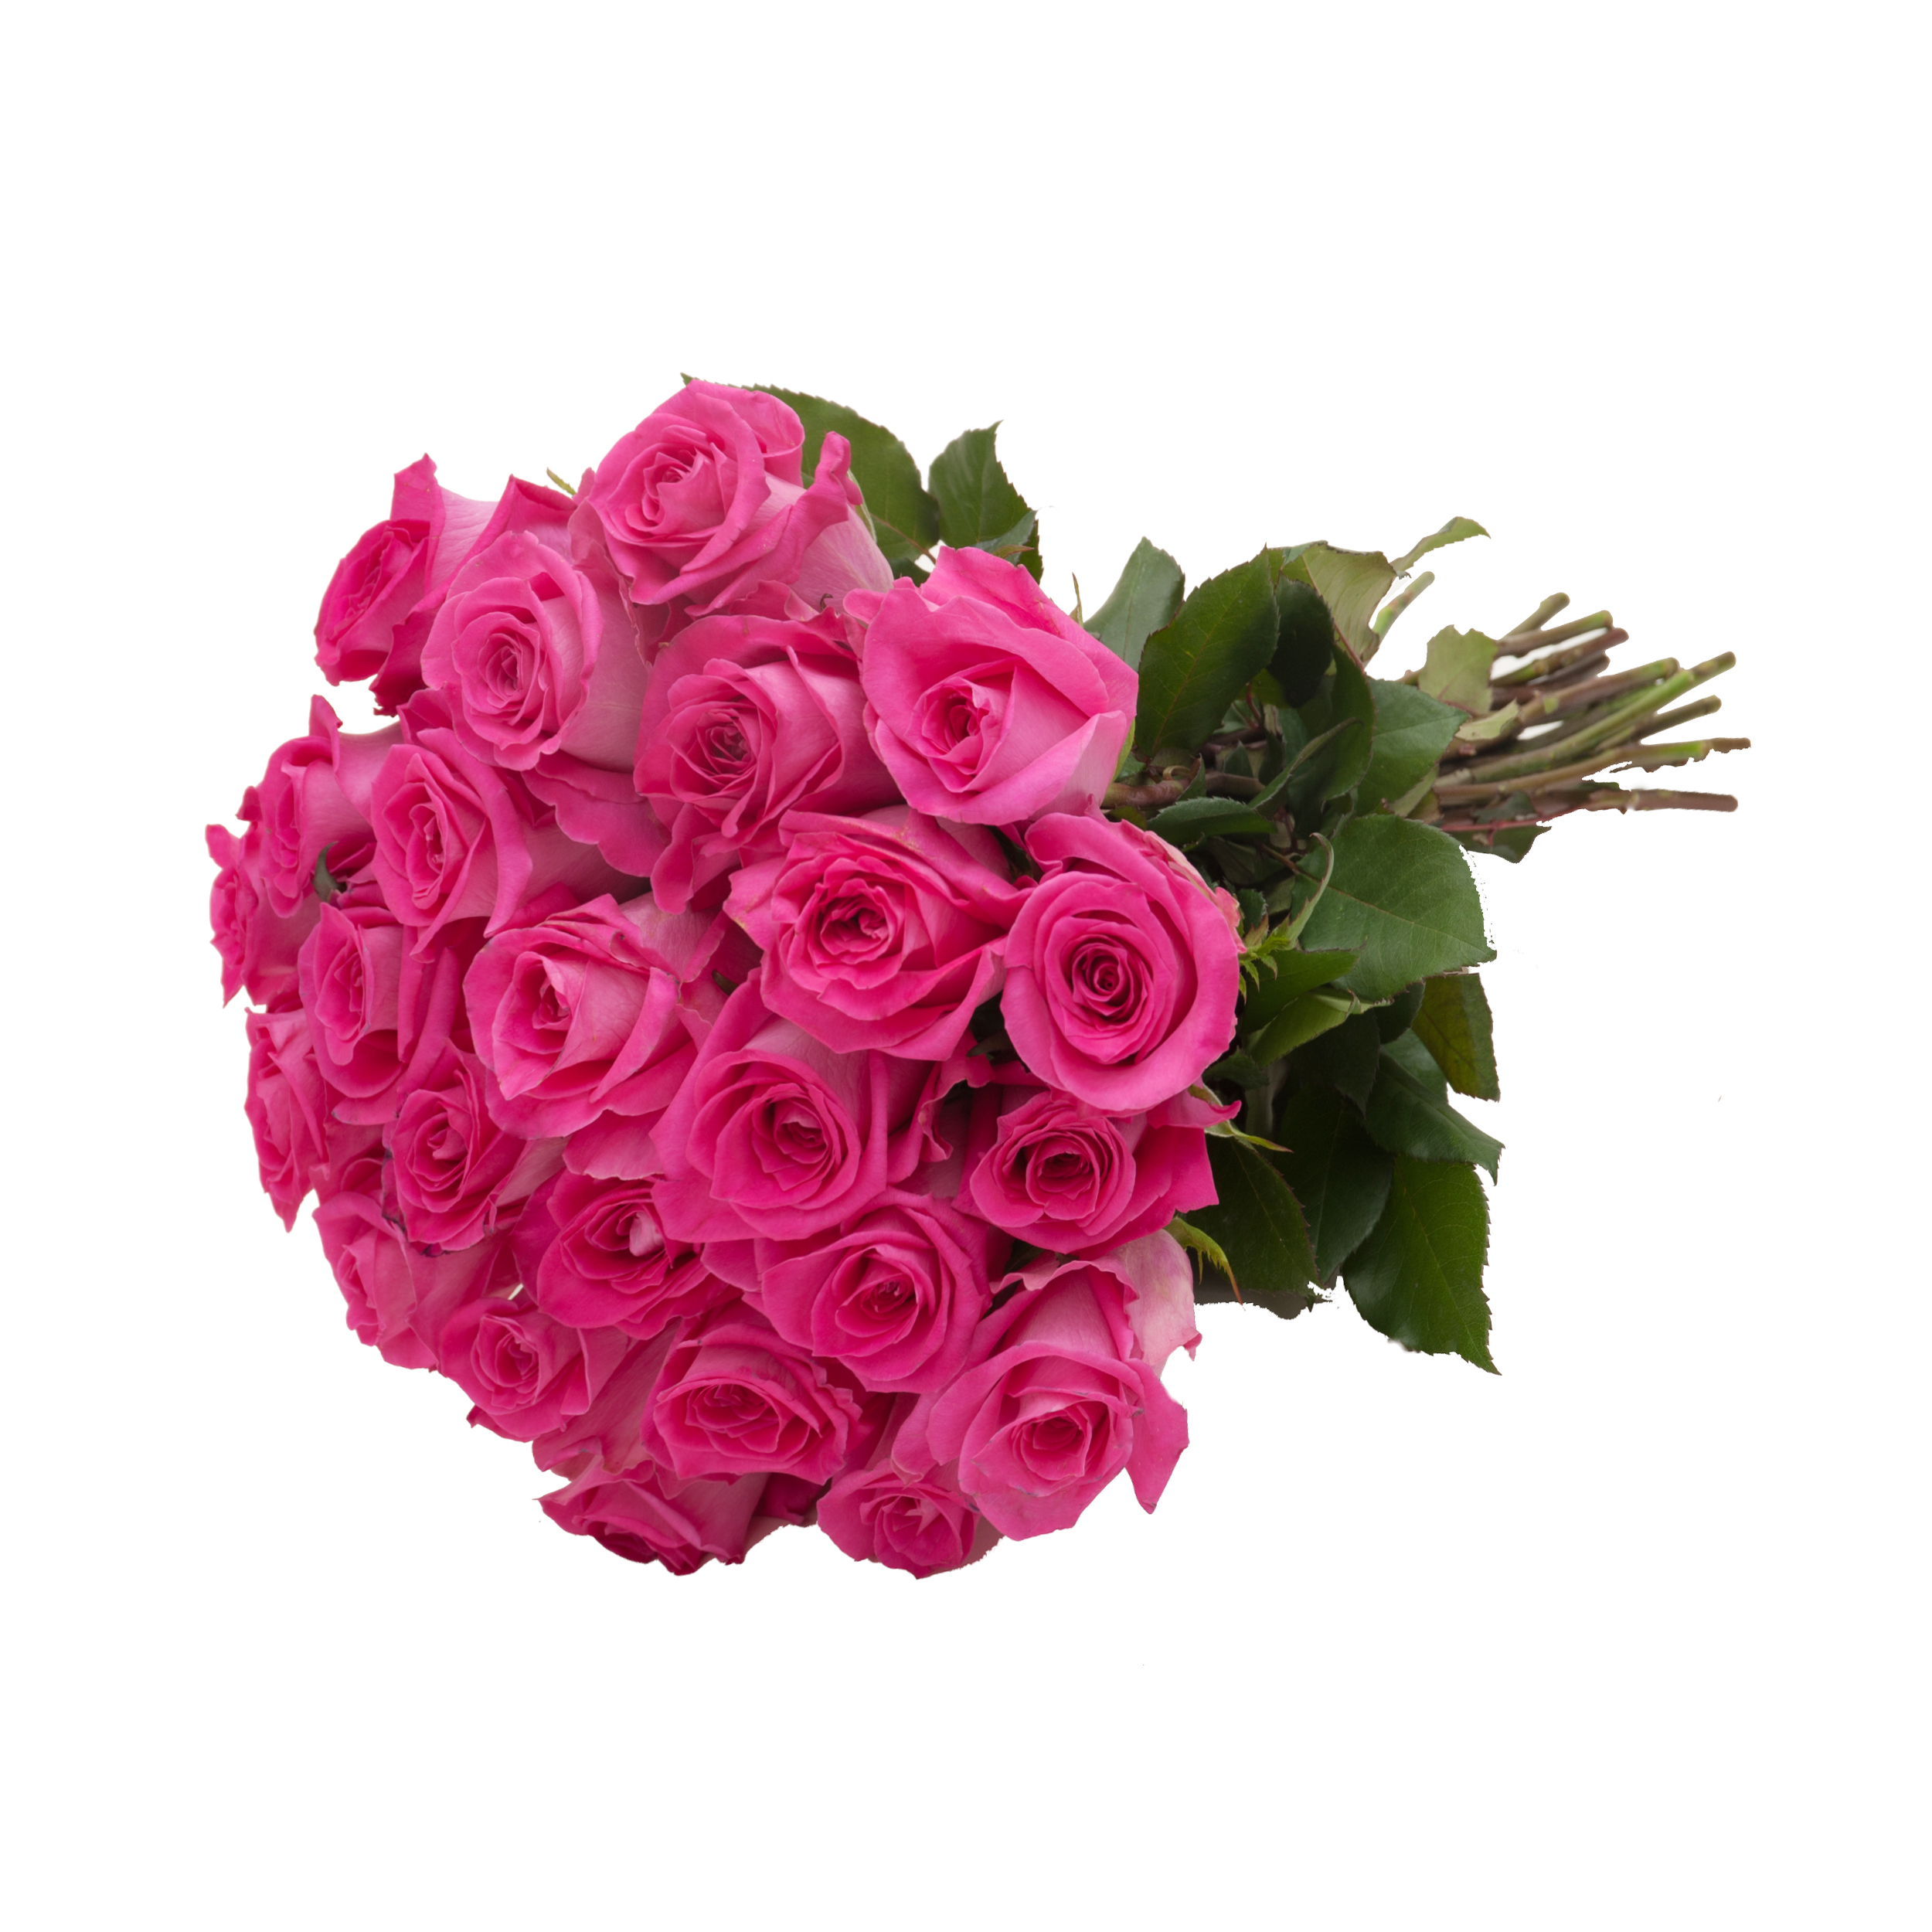 Hot Pink Roses - Farm Direct Fresh Cut Flowers - 50 Stems - Roses -by Bloomingmore - image 2 of 7